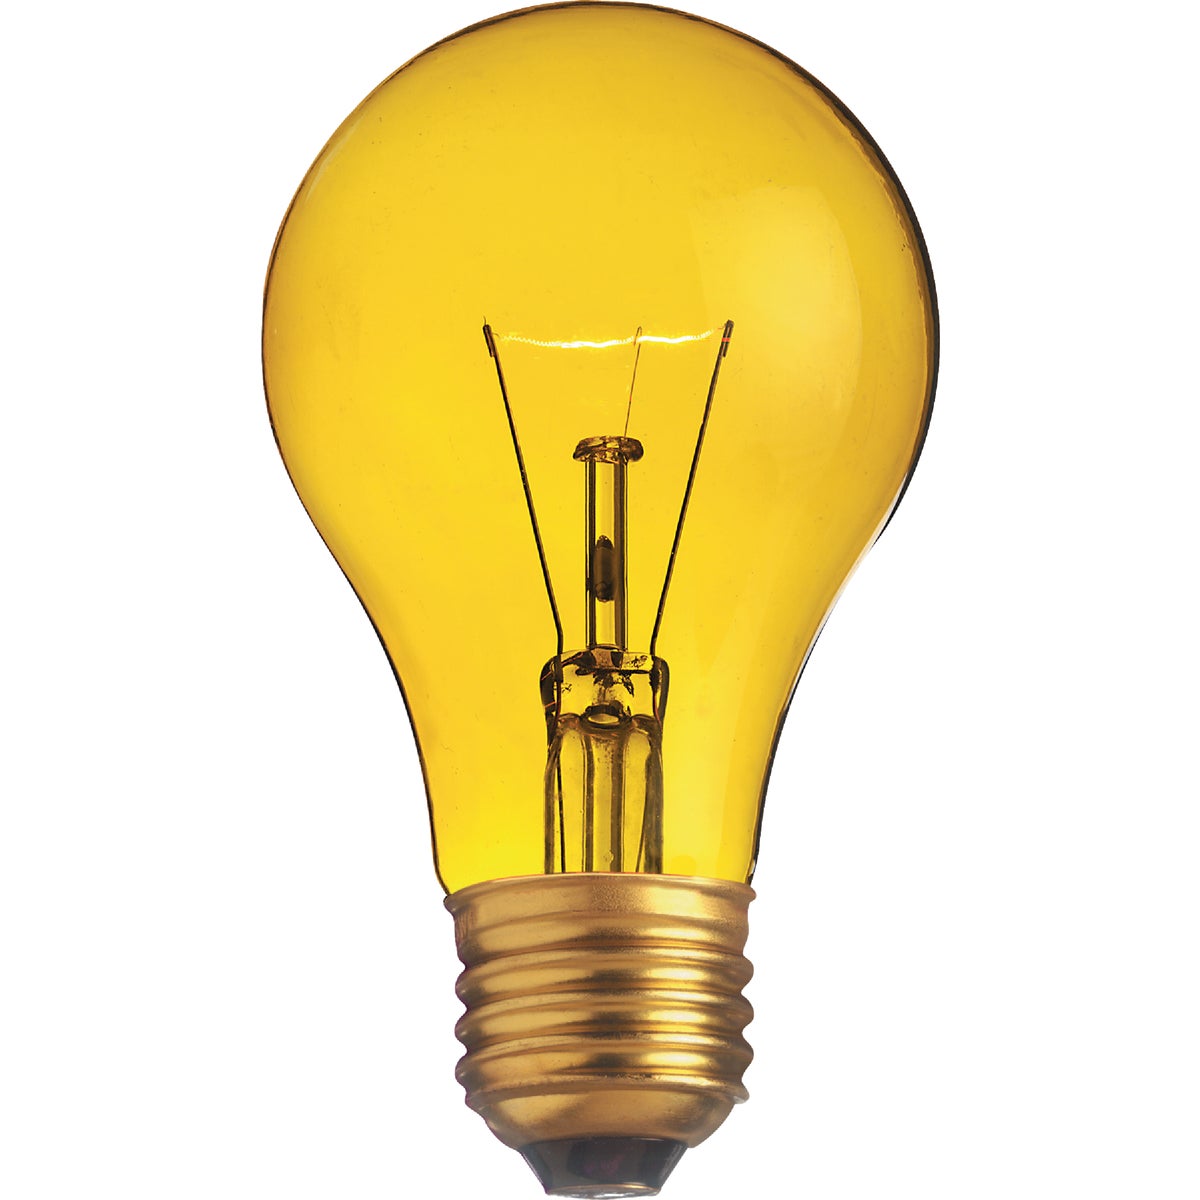 Item 535133, A19 incandescent party light bulb with medium base.